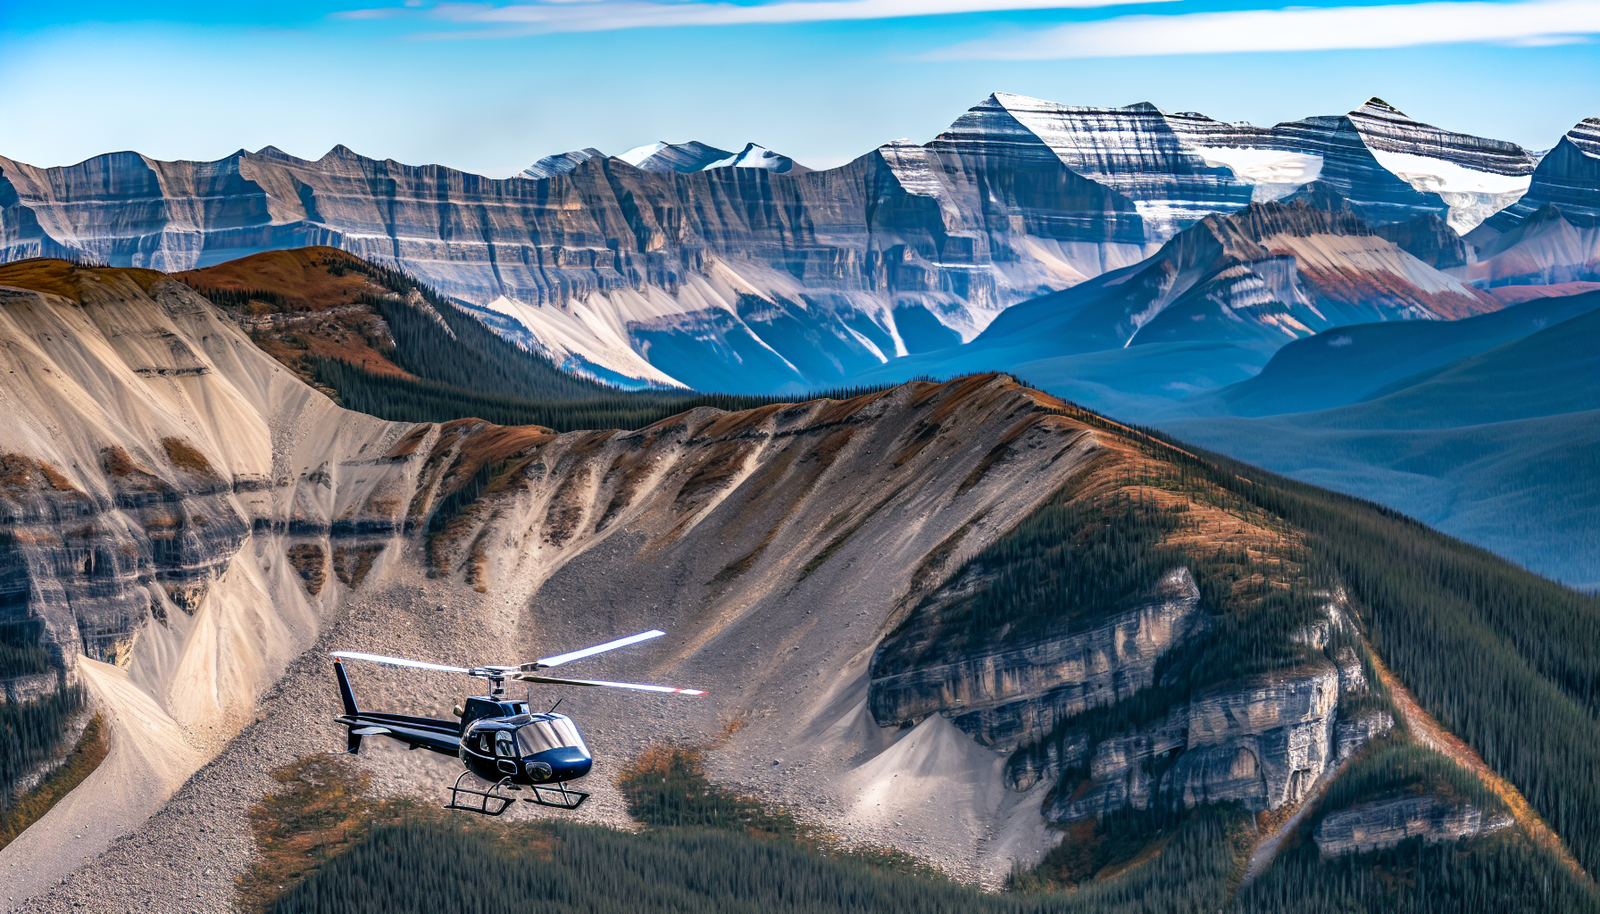 Helicopter tour over the Canadian Rockies